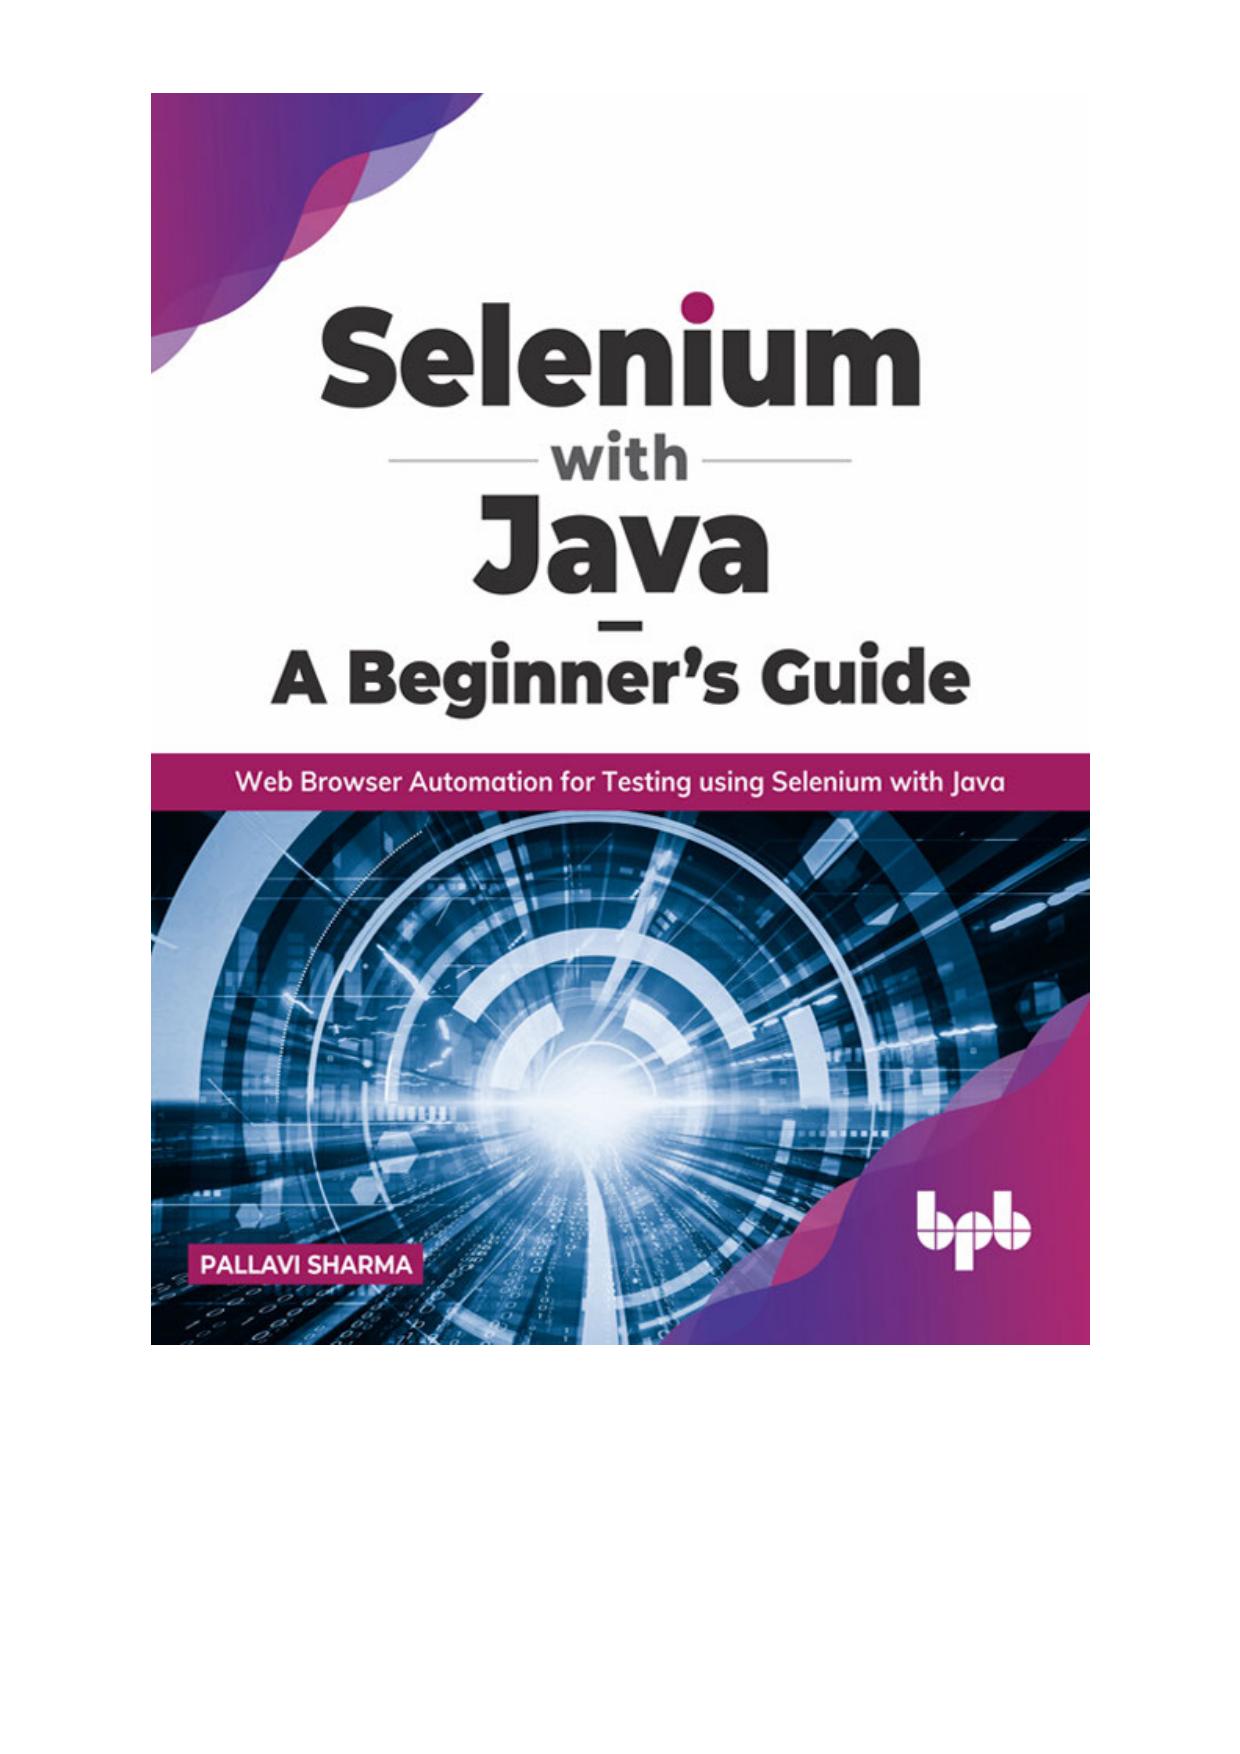 Selenium With Java – a Beginner’s Guide: Web Browser Automation for Testing Using Selenium With Java